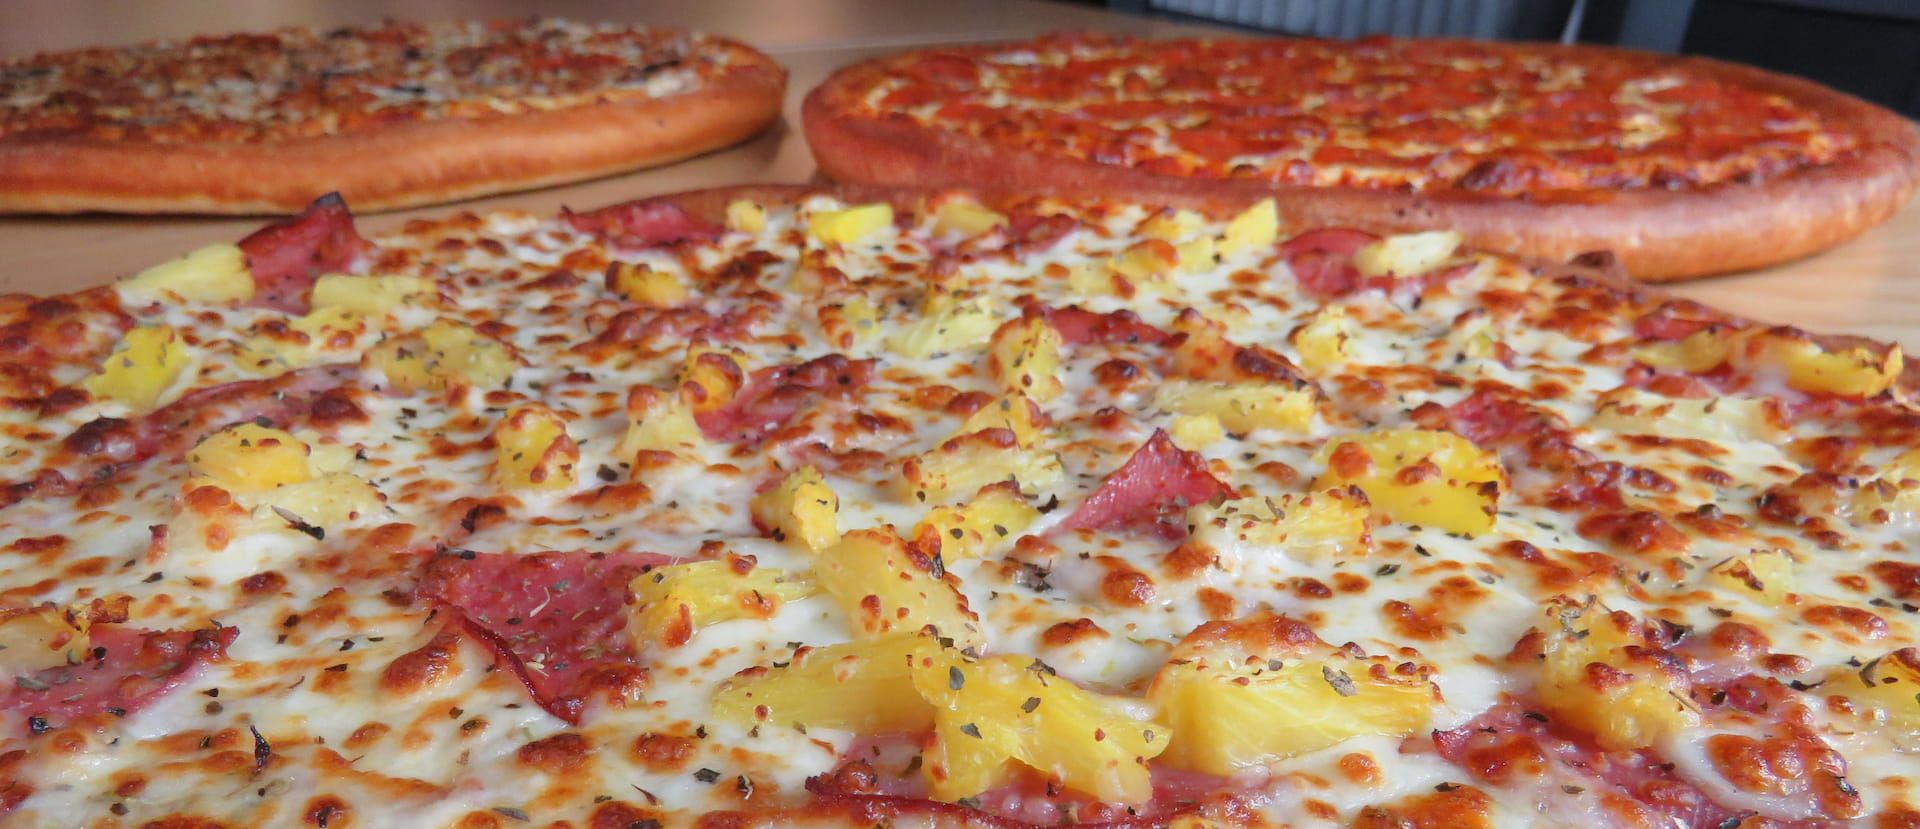 Hawaiian pizza in front of two other pizzas